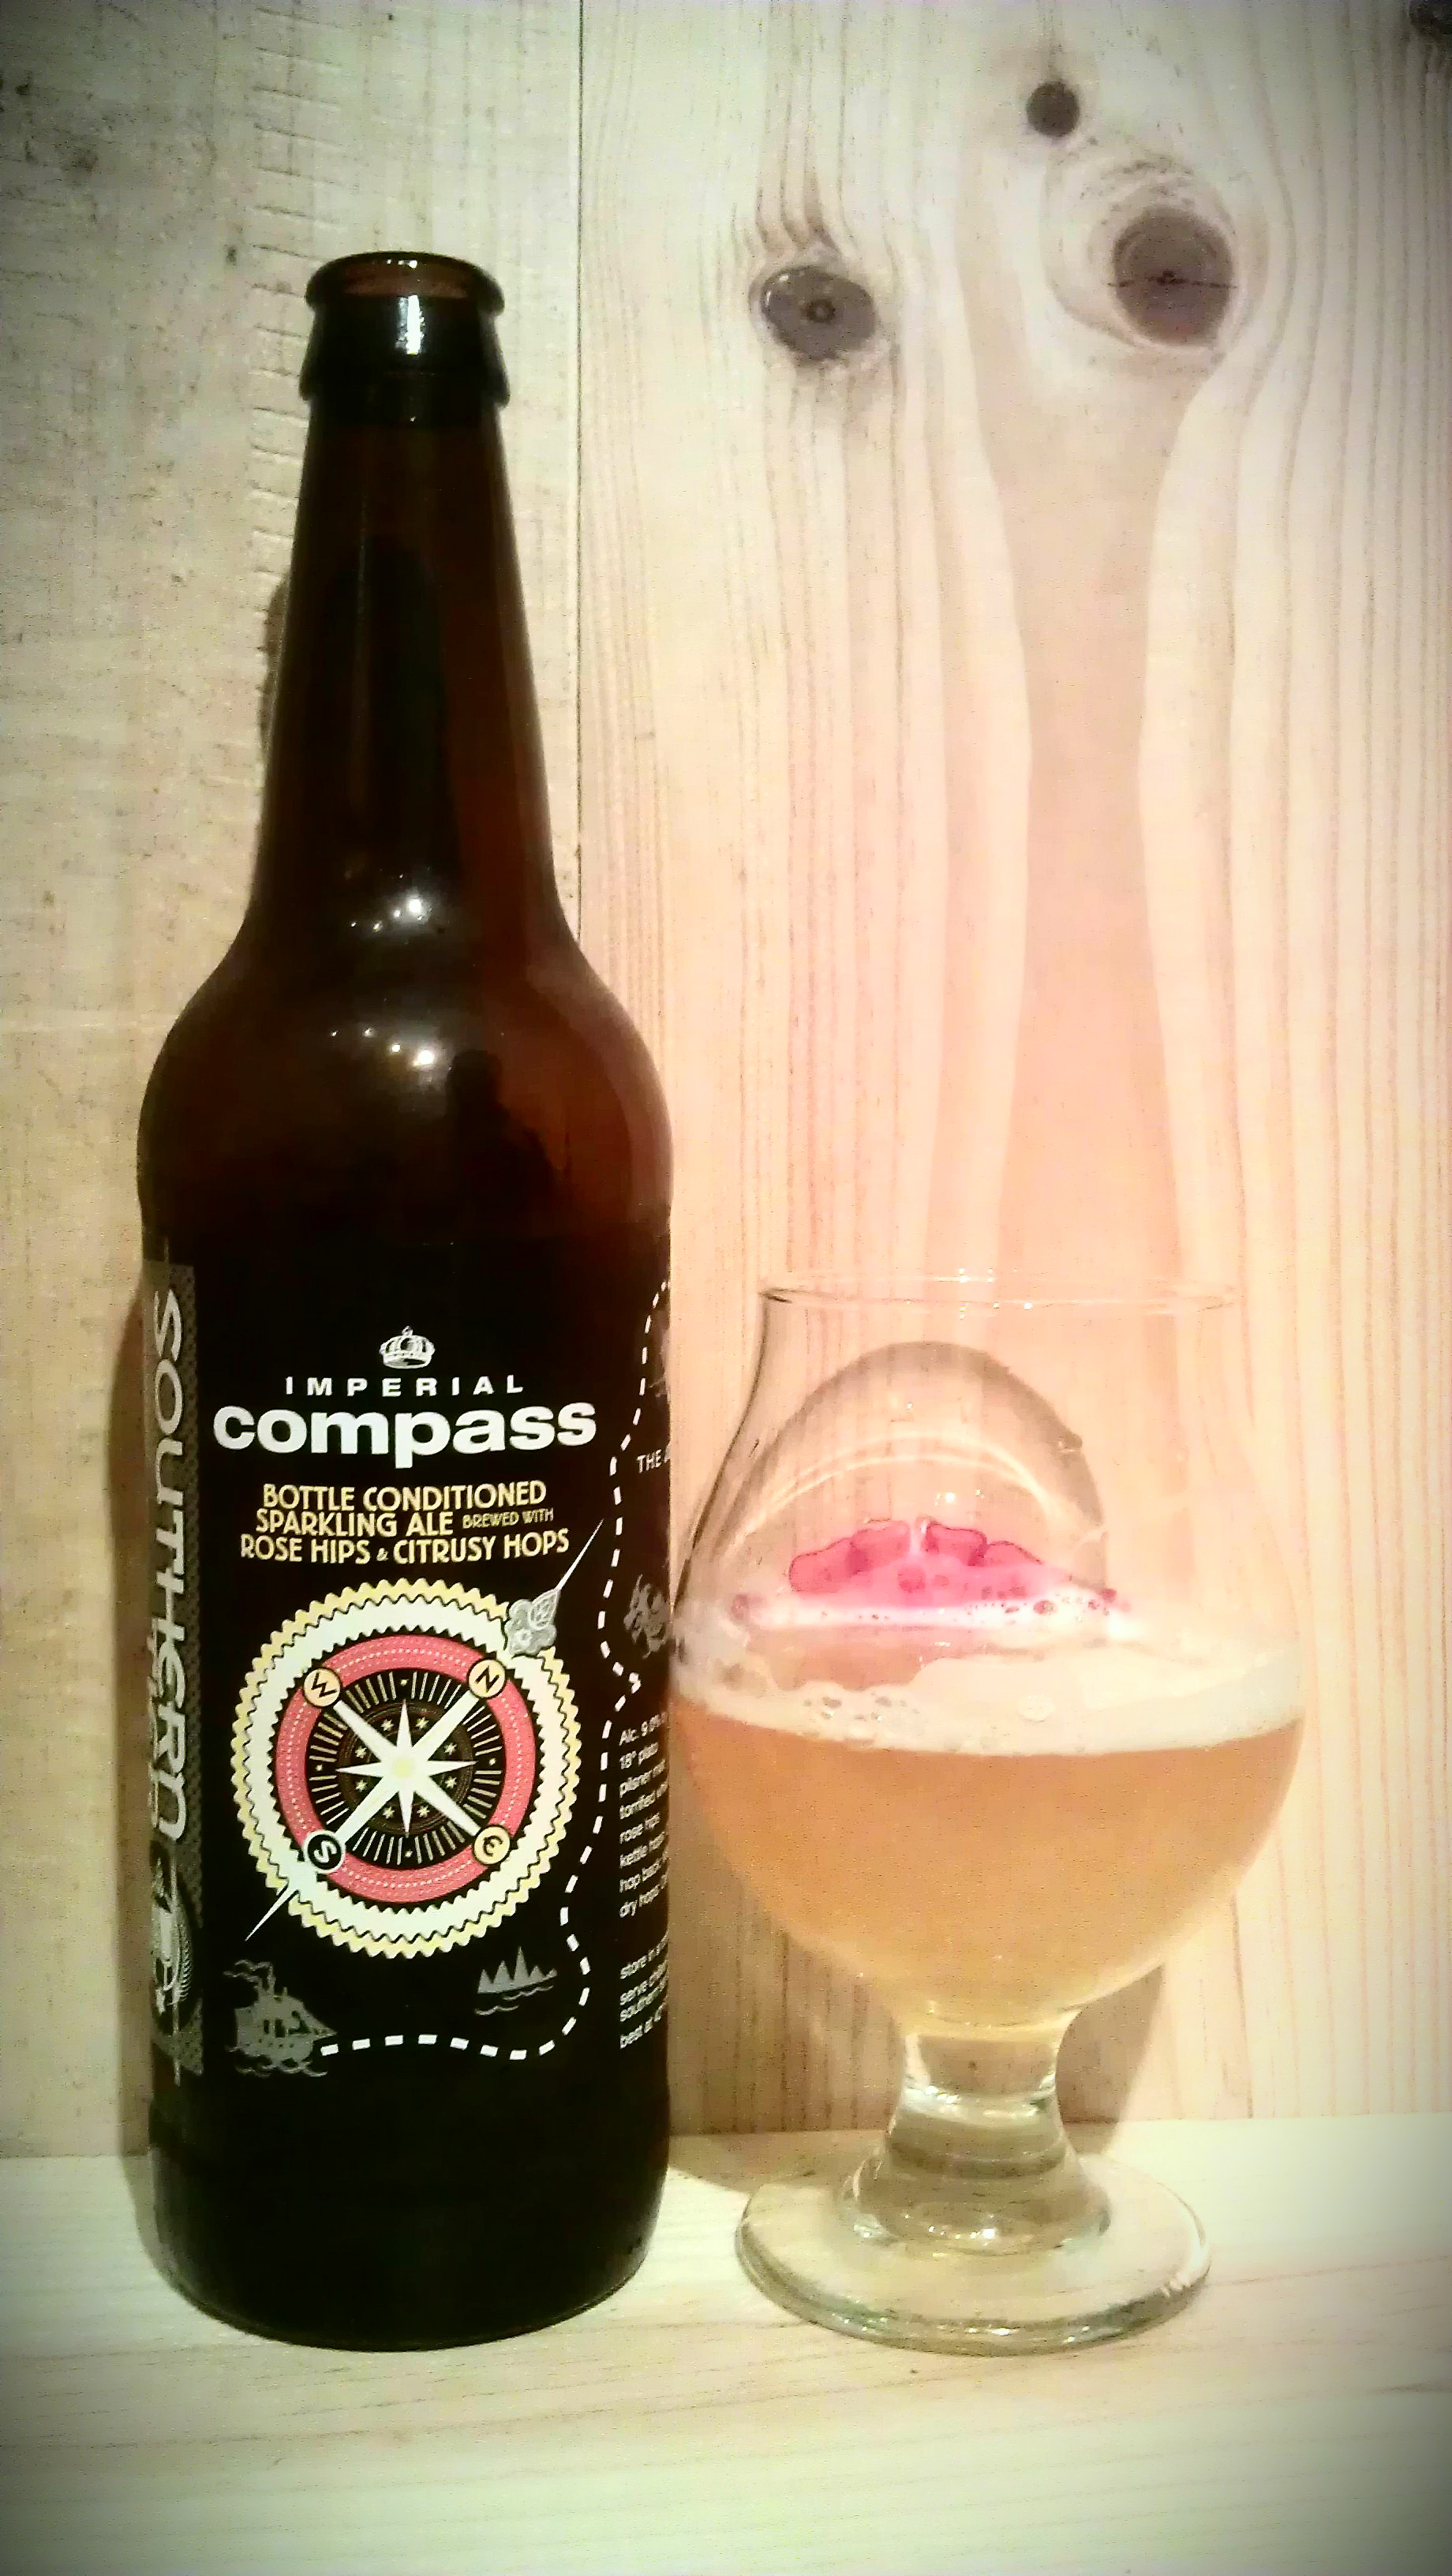 Southern Tier Compass